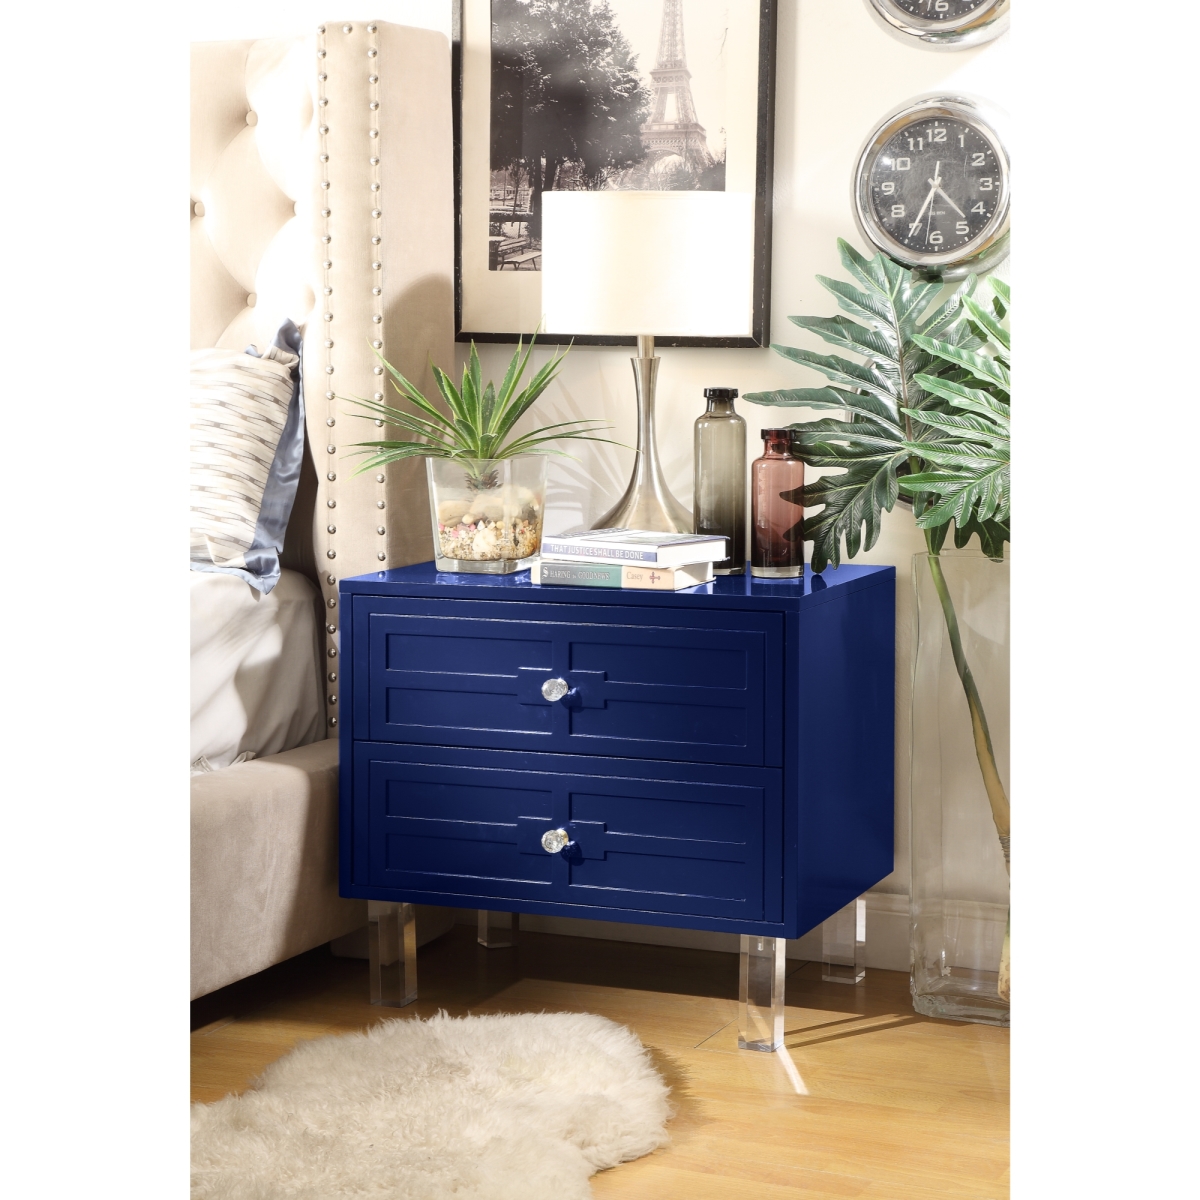 Peyton Mdf Wood Modern Lacquer Lucite Leg Side Table Accent Table & Nightstand - Navy